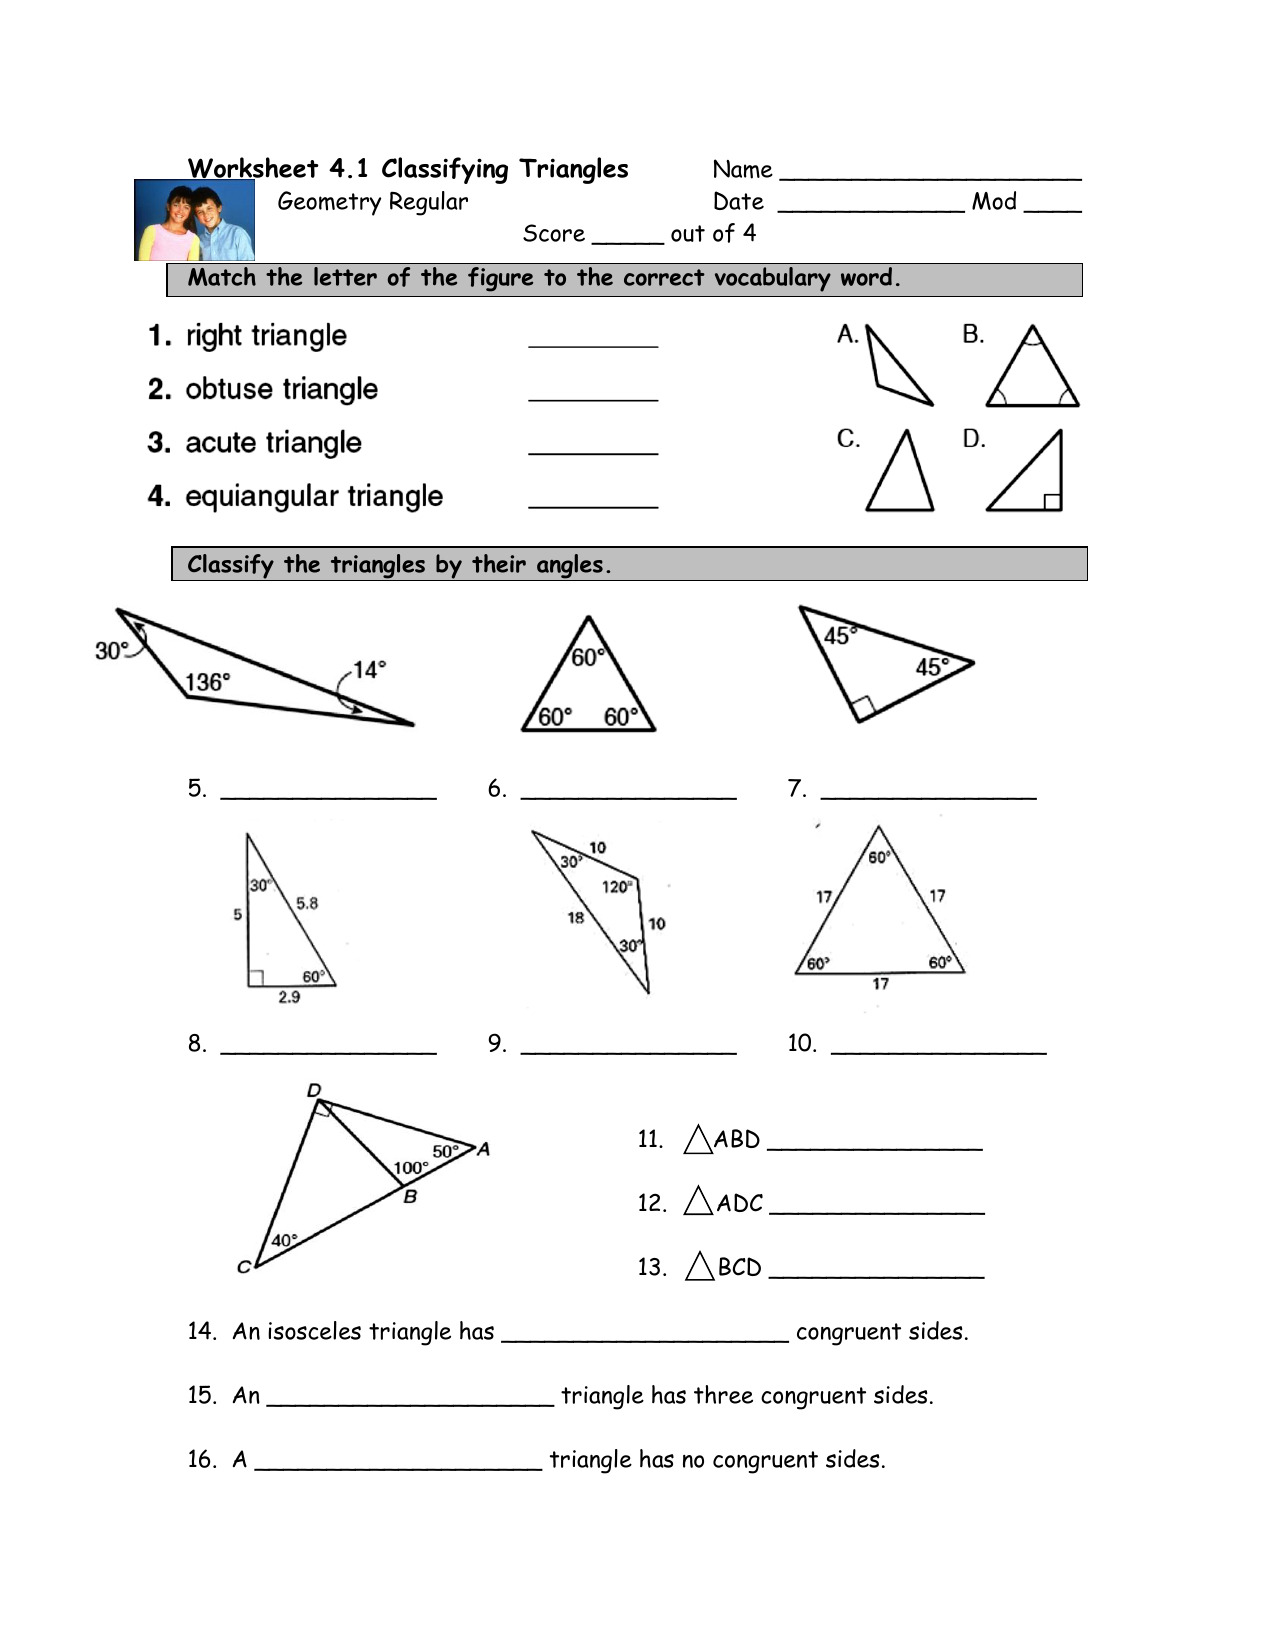 50-classifying-triangles-worksheets-for-4th-grade-on-quizizz-free